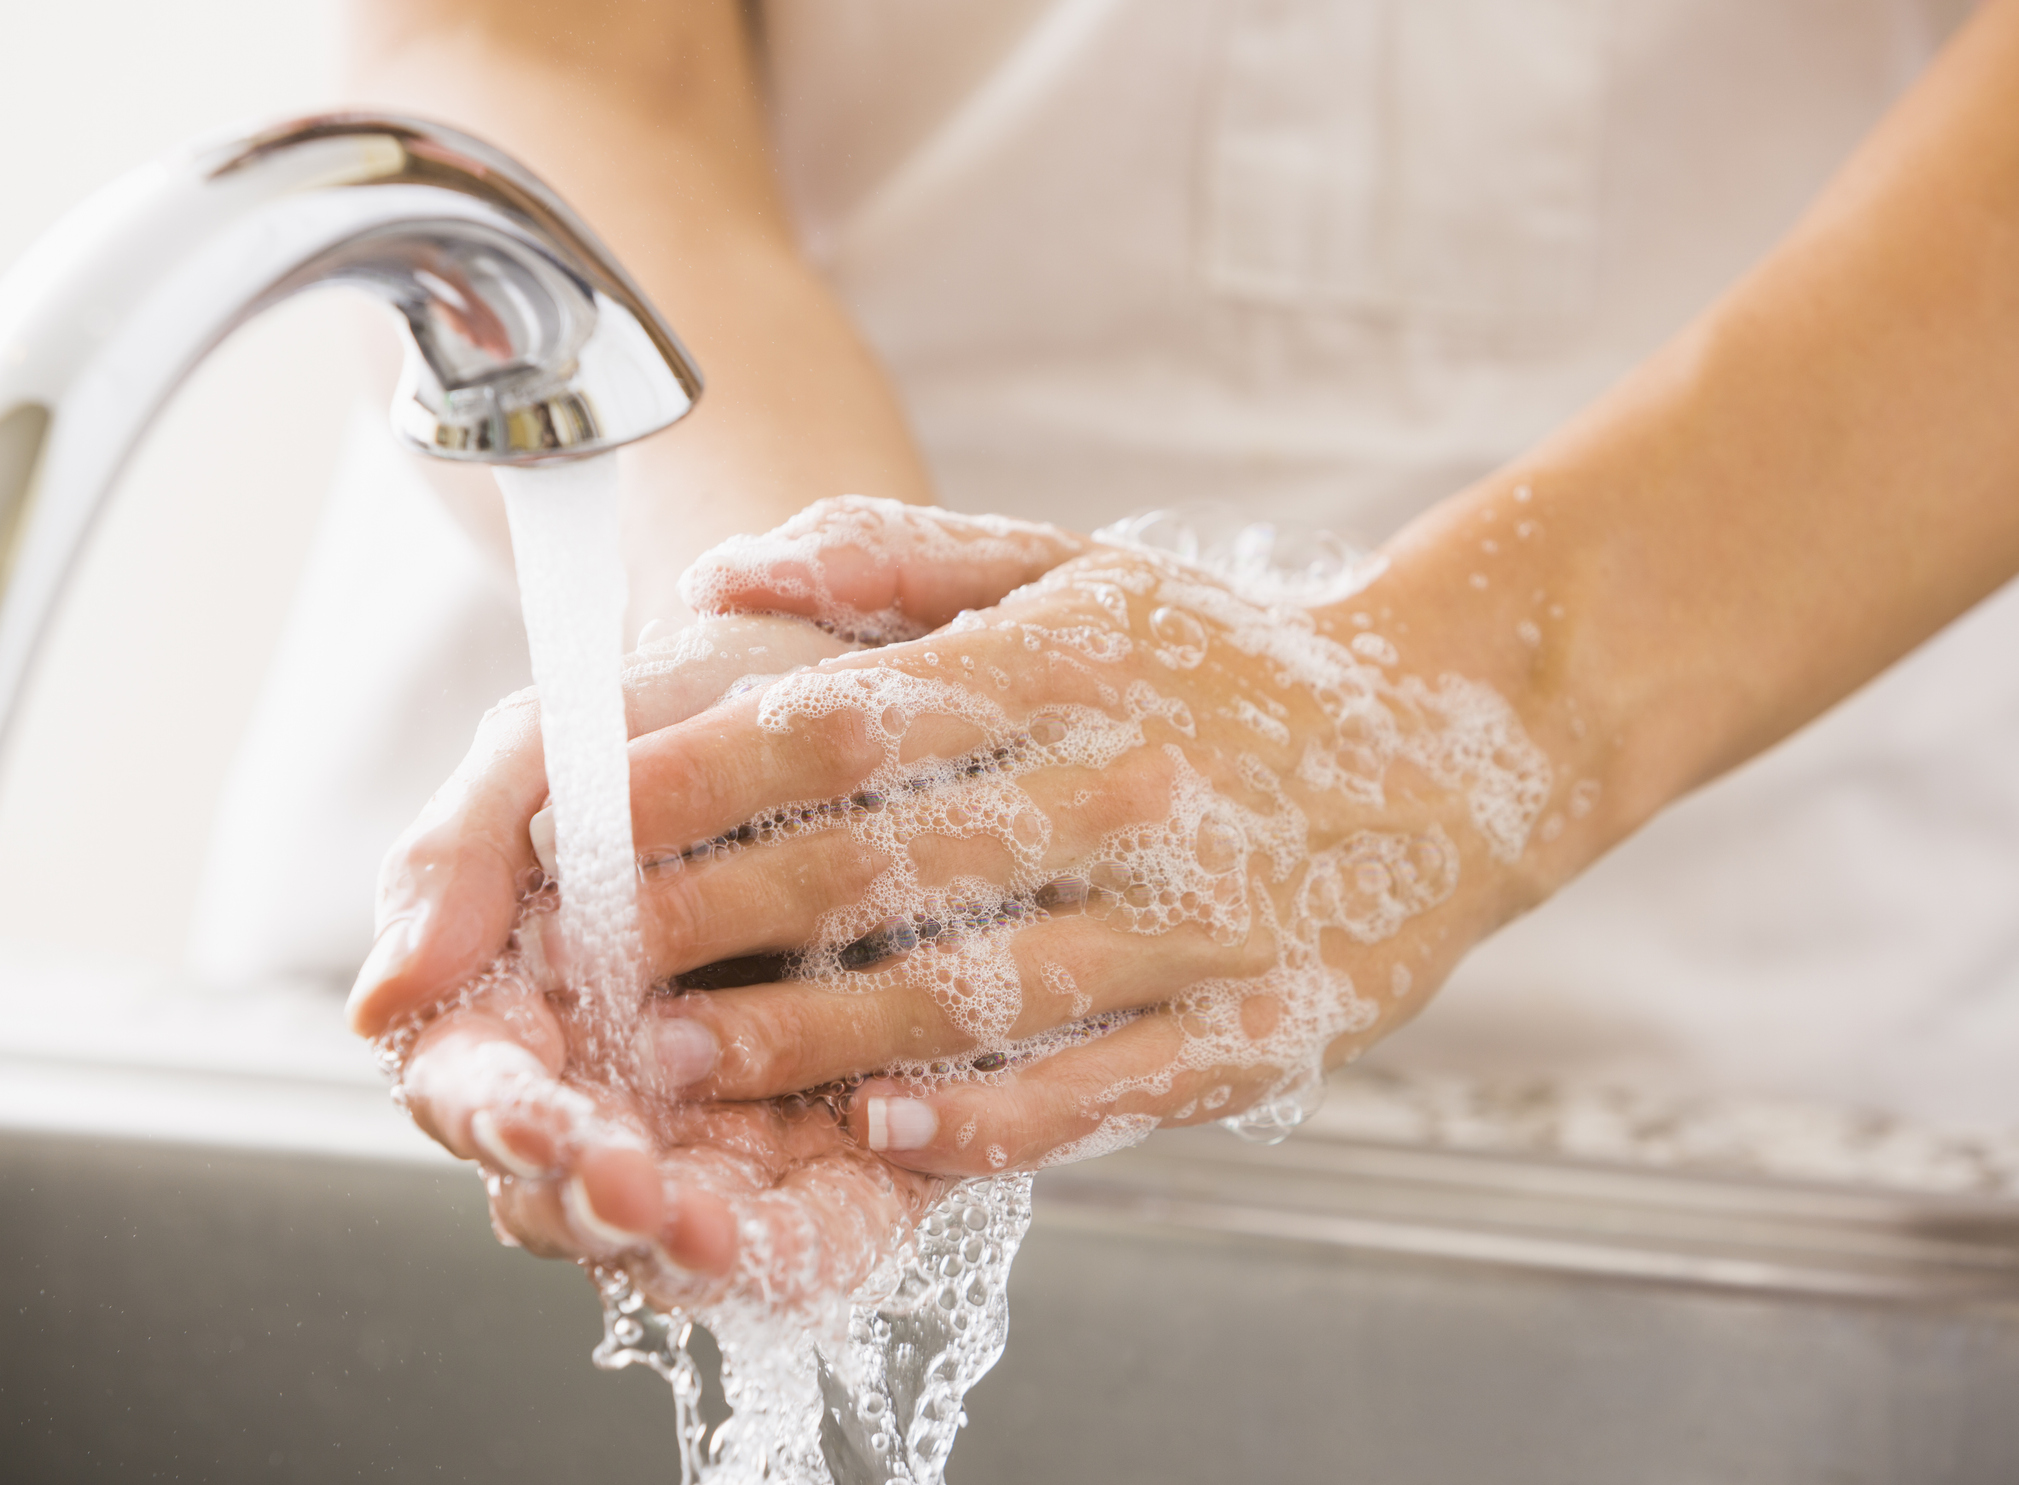 Article image for The stats are in: Australians aren’t very good at washing their hands